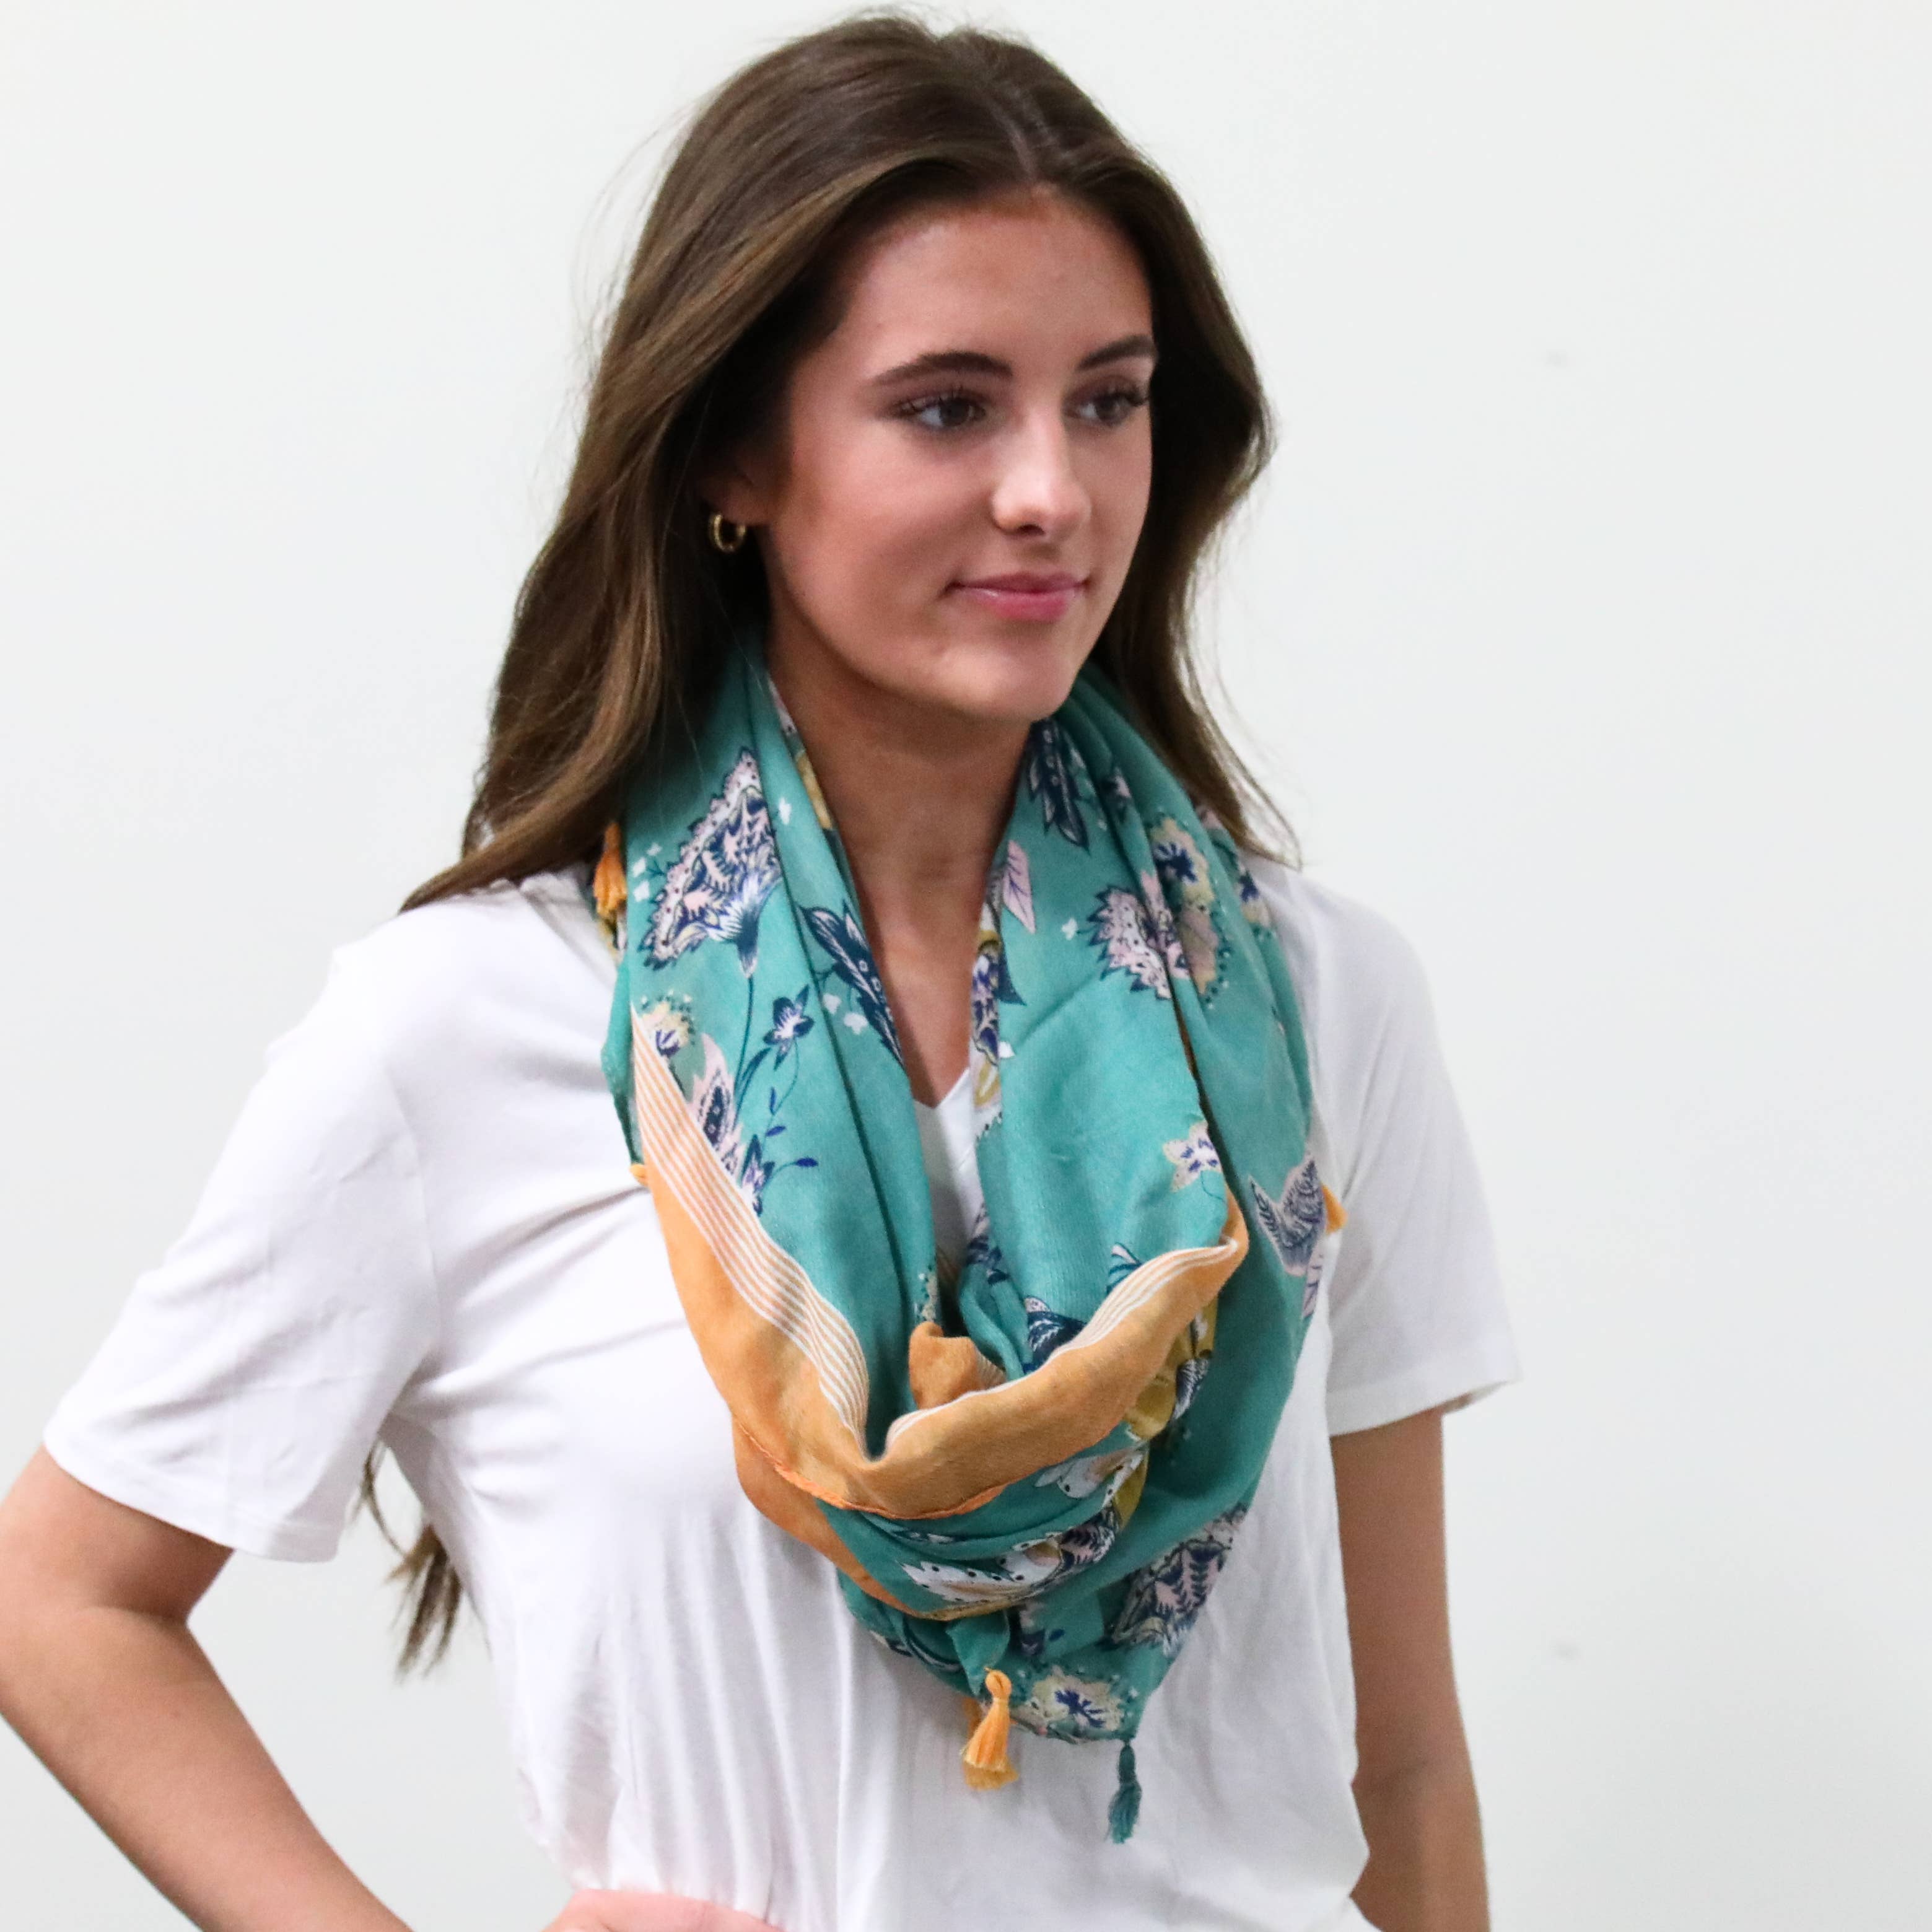 Bandana Women's Scarf Square Scarf Handpainted Gift For Her Unique Scarf Neck Scarf Coral Glow 100% Silk Neckerchief Head Scarf